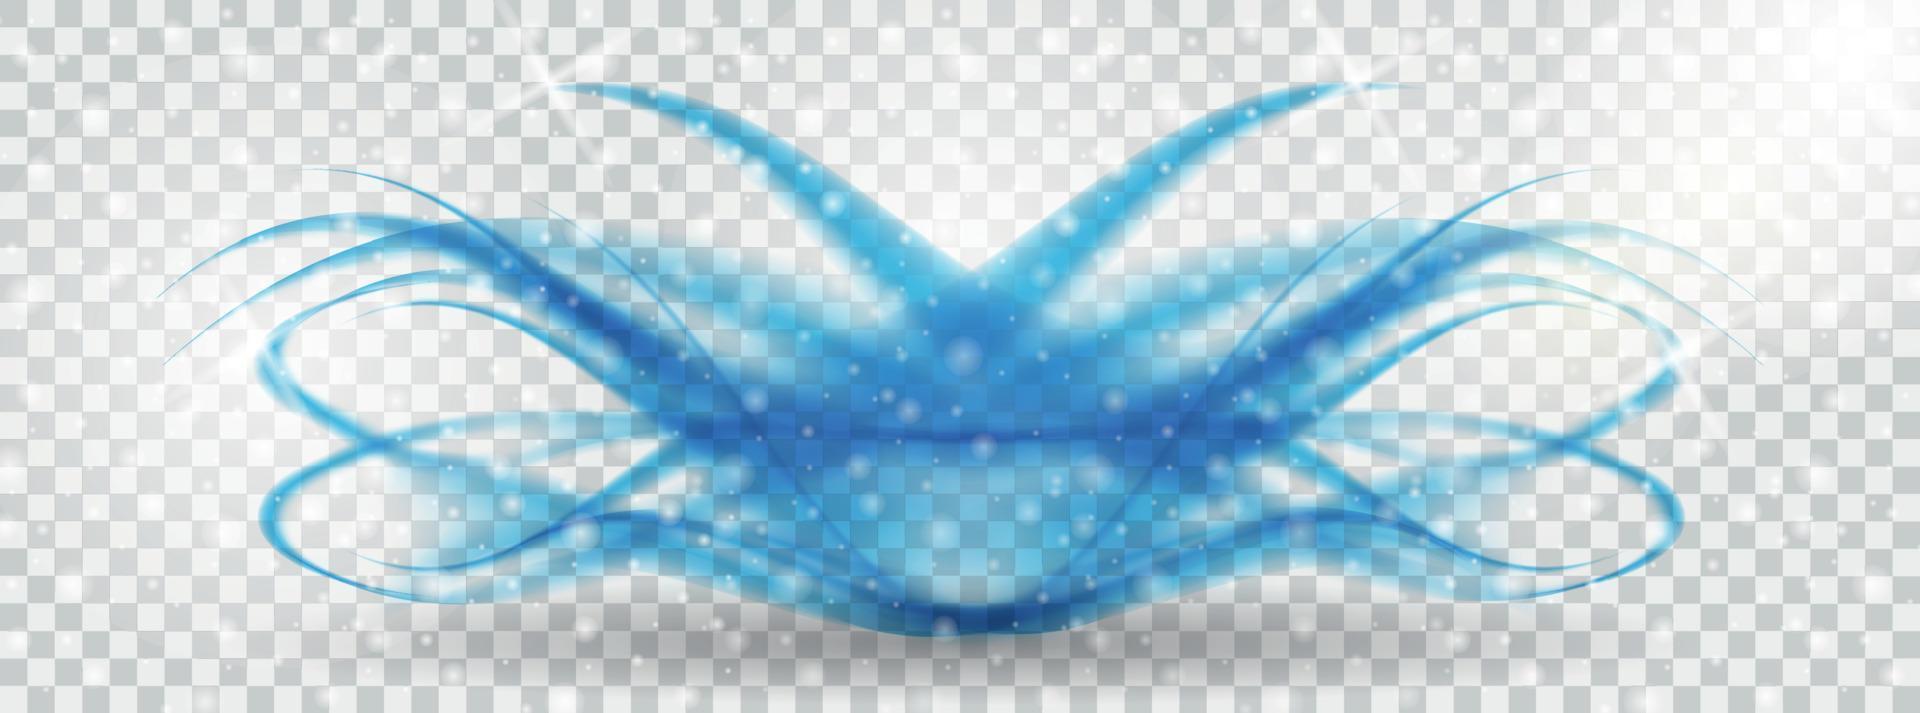 Abstract Blue Wave on transparent Background. Vector Illustration